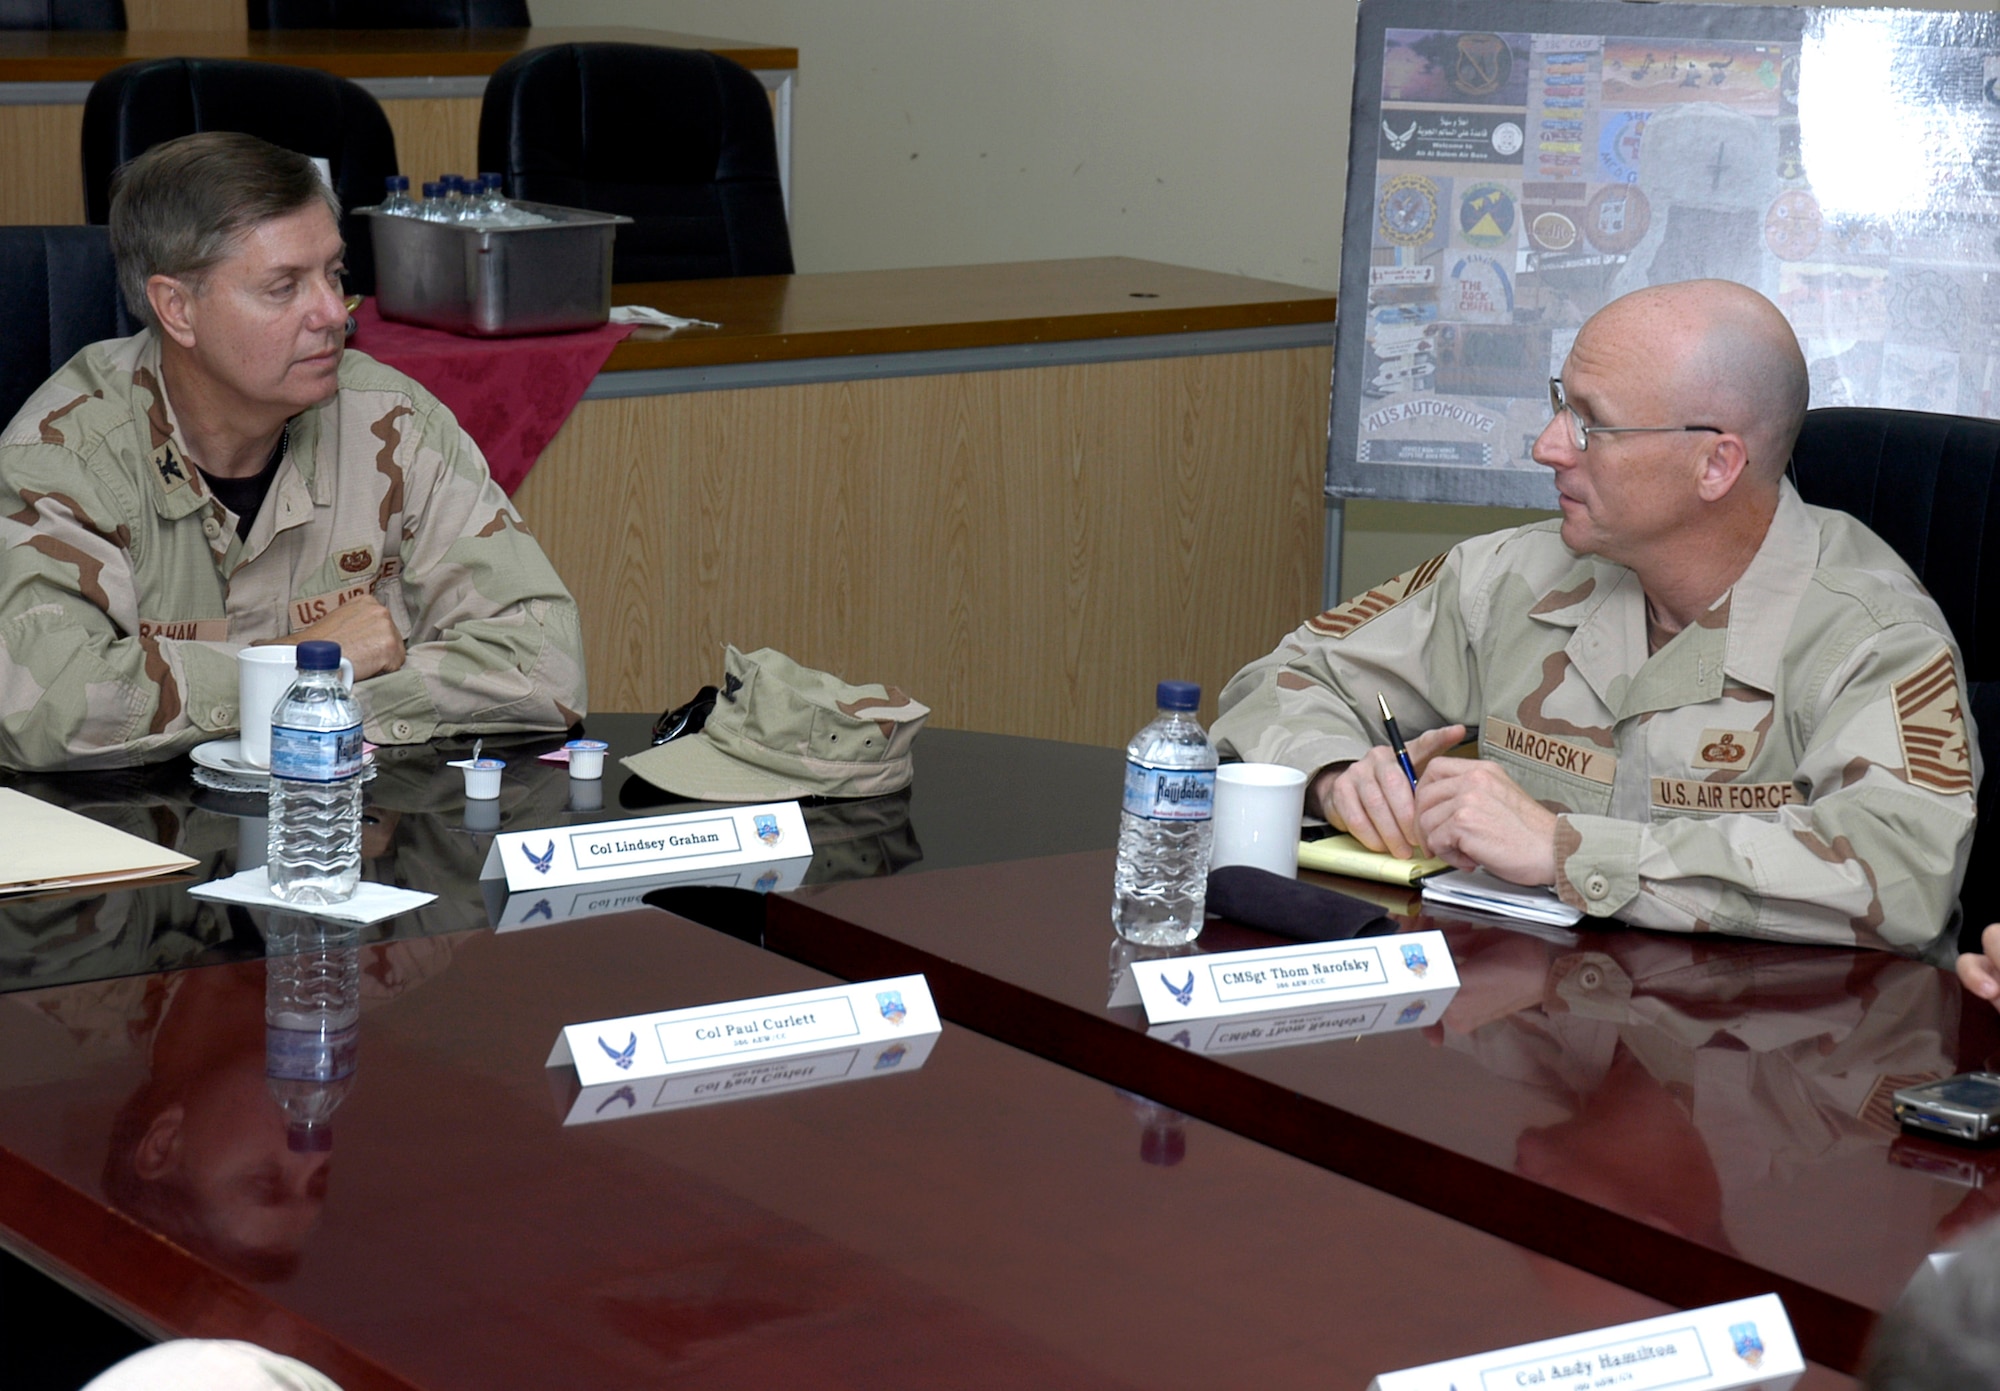 Col. Lindsey Graham chats with Chief Master Sgt. Thomas Narofsky during a briefing in the wing conference room April 9 in Southwest Asia. The senior senator from South Carolina is a Reserve judge advocate. He recently spent two days in Iraq with Sen. John McCain, then another week as a JA with the Multinational Force, Iraq. Chief Narofsky is the 386th Air Expeditionary Wing command chief. (U.S. Air Force photo/Staff Sgt. Ian Carrier)
